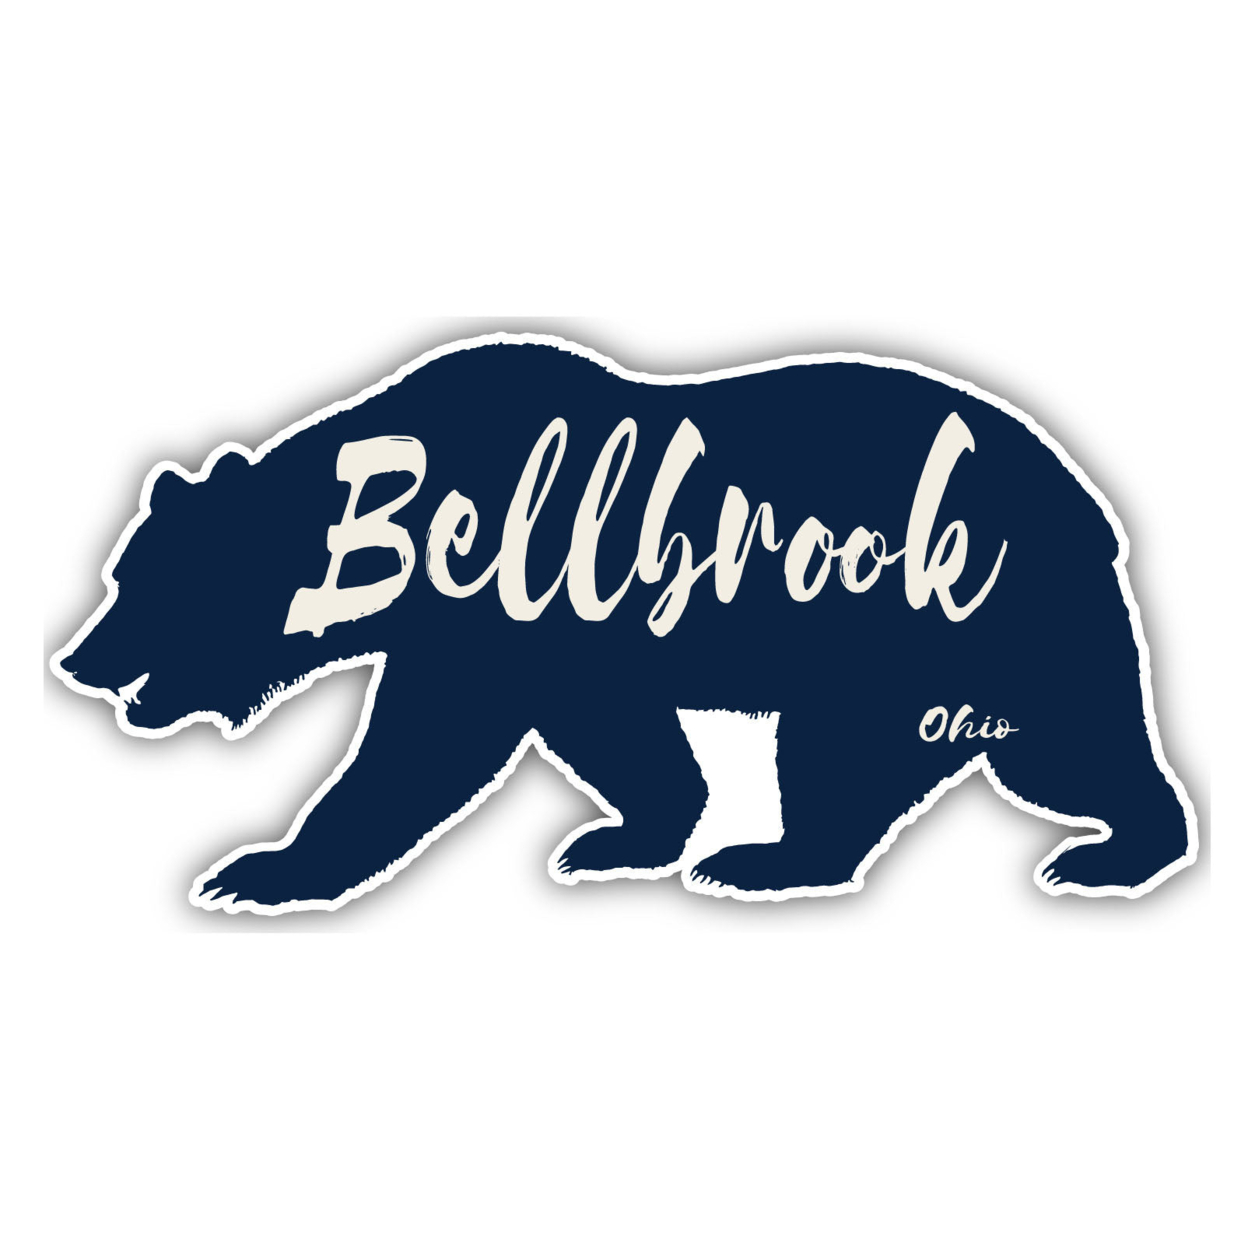 Bellbrook Ohio Souvenir Decorative Stickers (Choose Theme And Size) - 4-Pack, 8-Inch, Bear